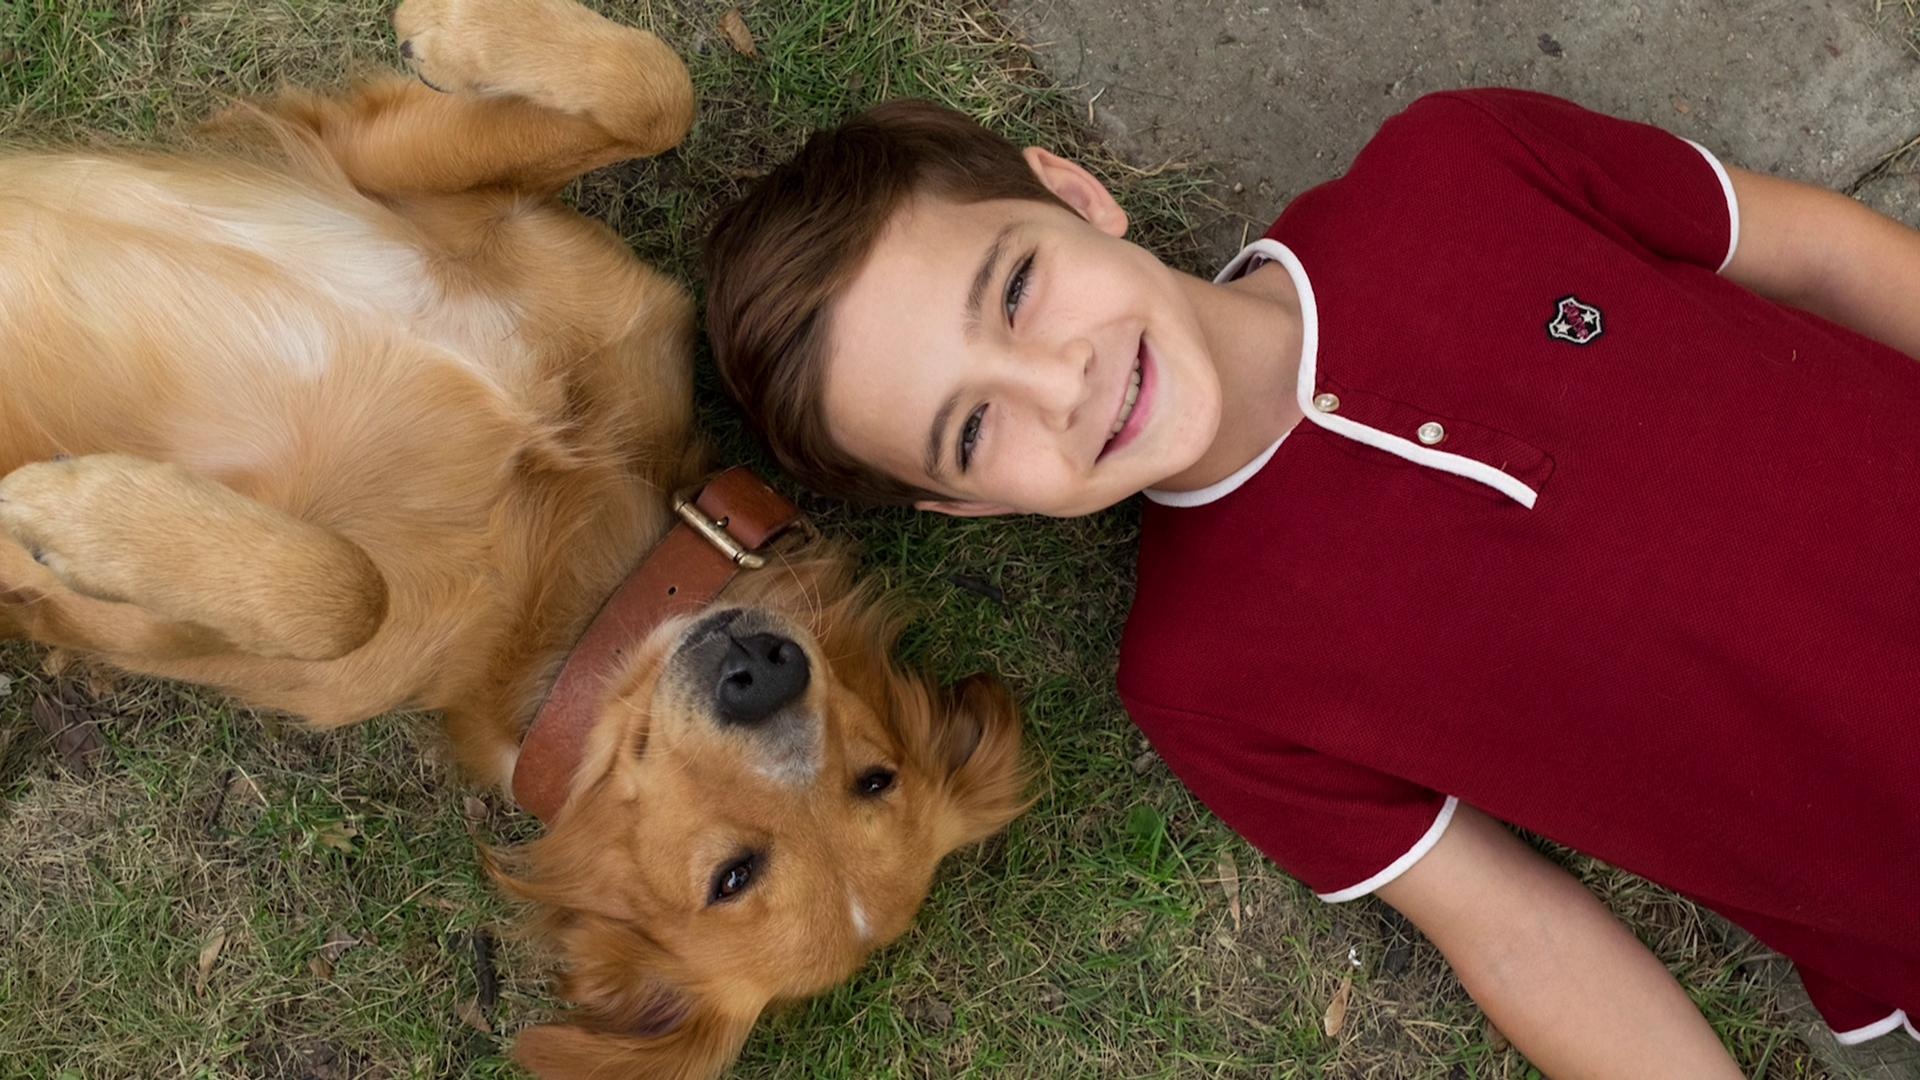 A Dog's Purpose, Touching movie, Emotional connection, Life lessons, 1920x1080 Full HD Desktop